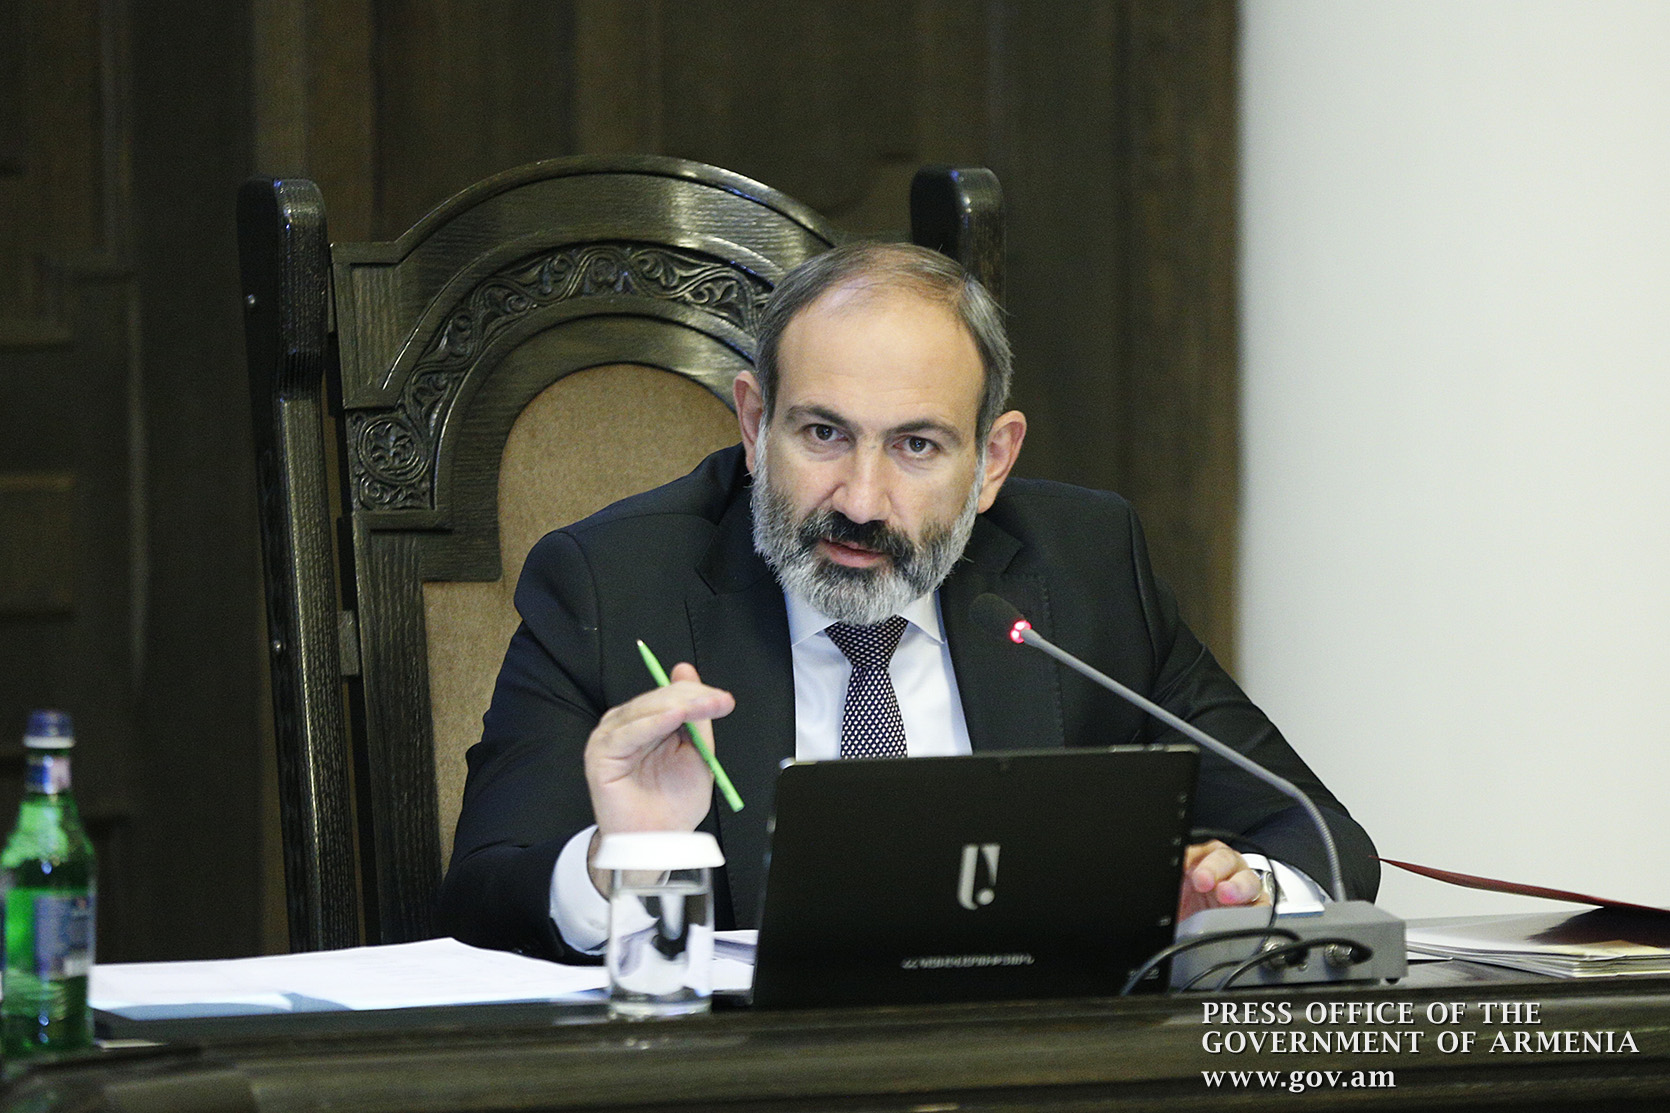 Nikol Pashinyan: ‘Taking decisions to improve the quality of life is to be a key guideline for the government’